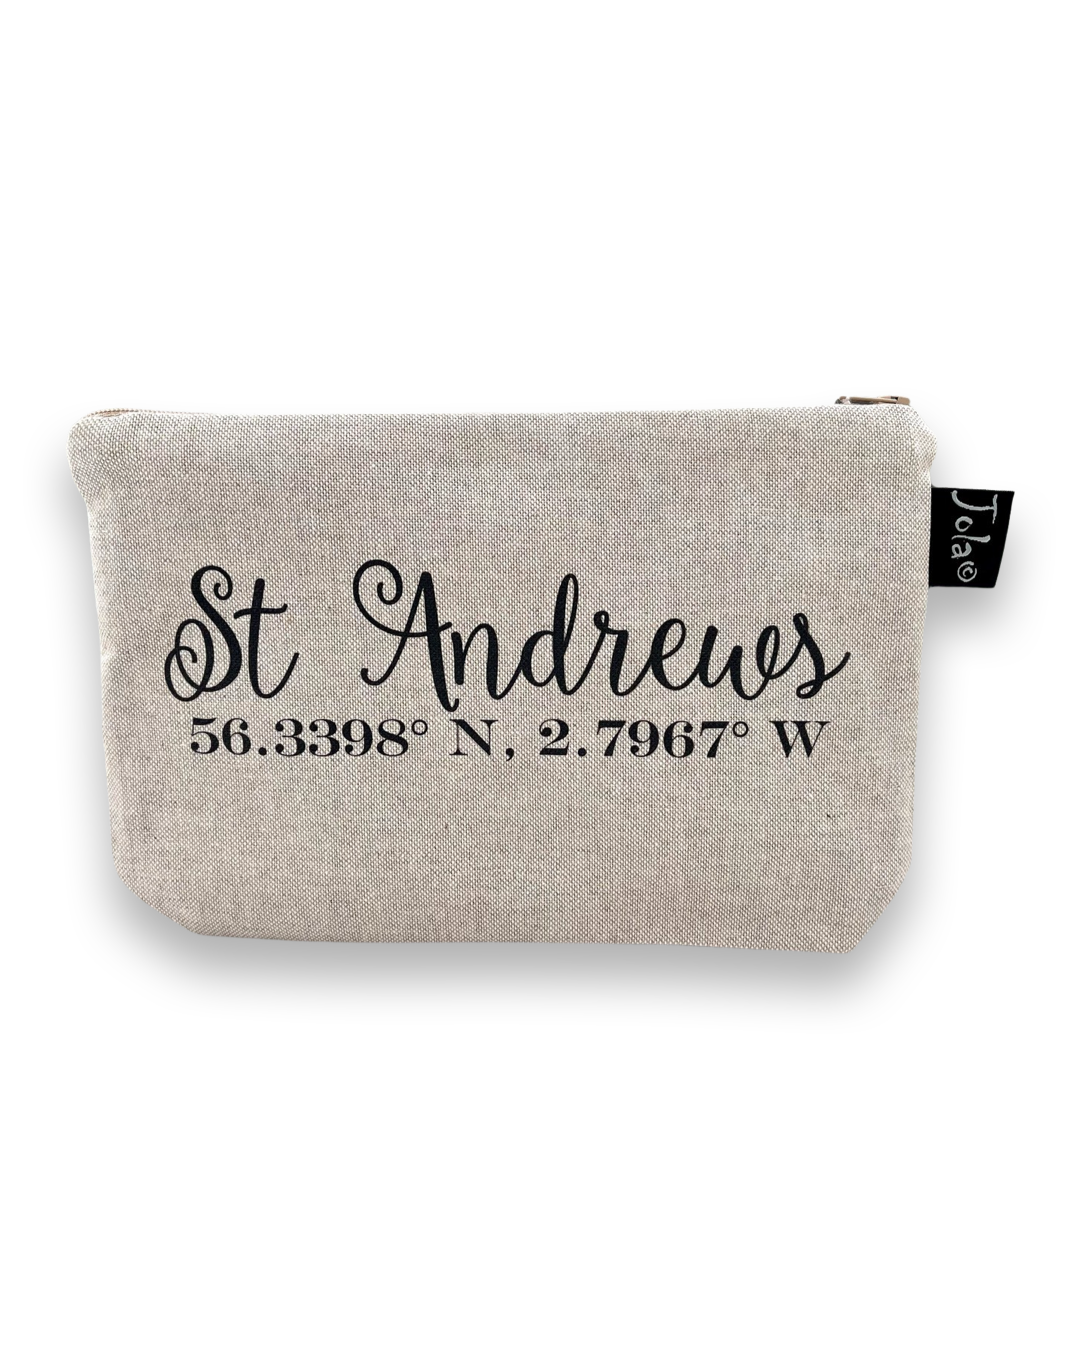 St. Andrews Co-ordinates Cosmetic Bag